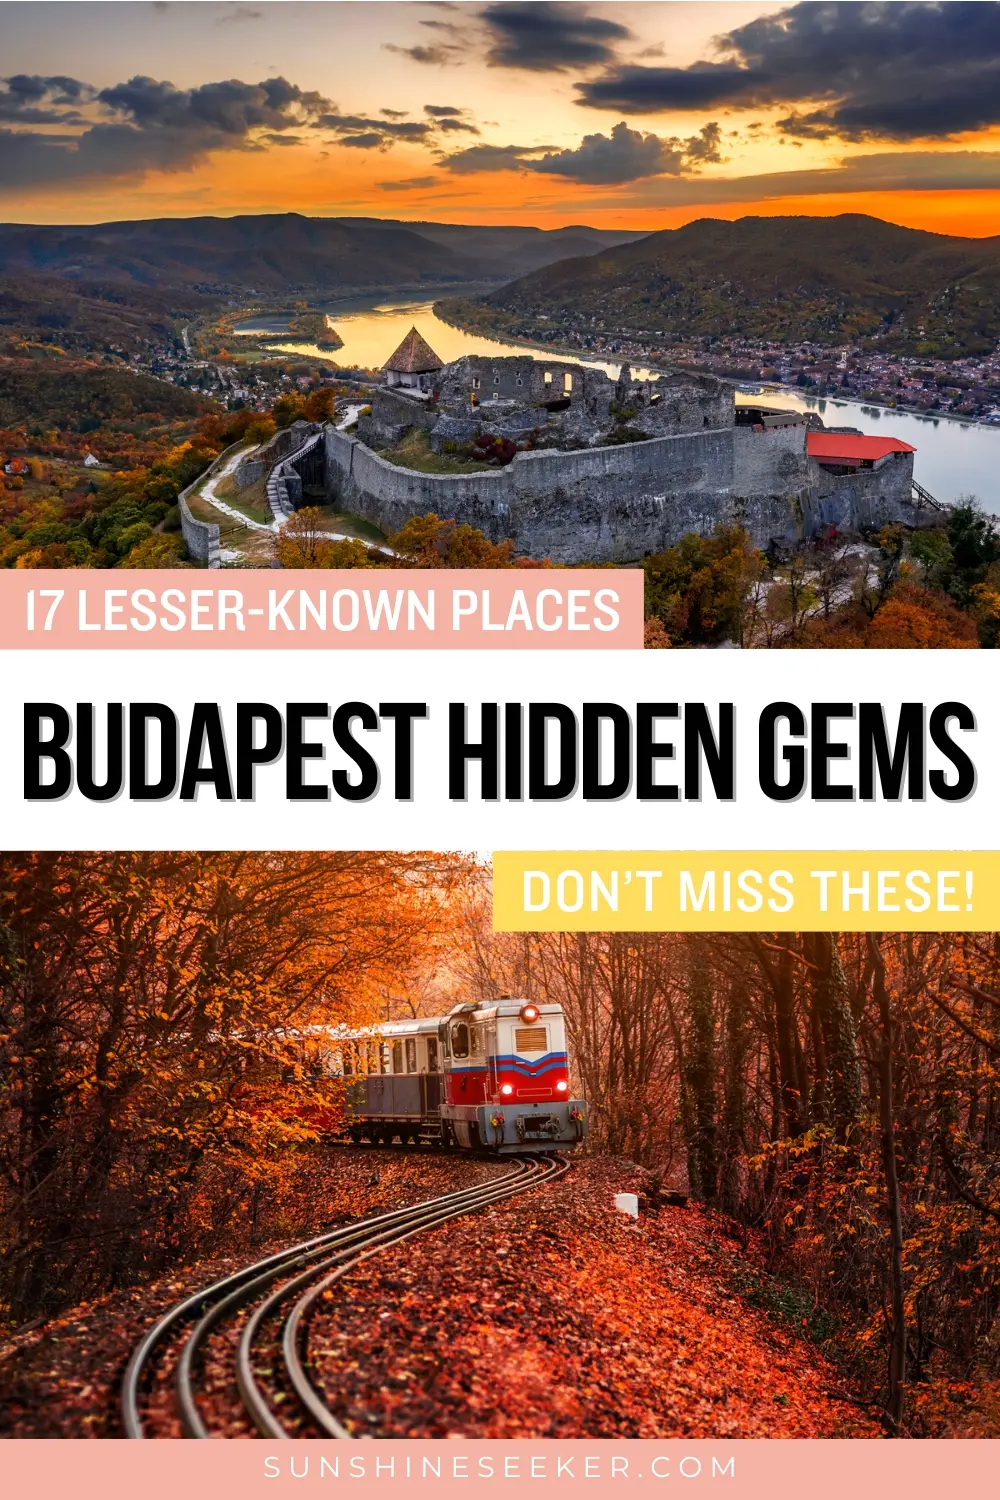 Don't miss these epic hidden gems in Budapest. From Roman ruins to caves and mini statue hunt. Check out this list of lesser-known attractions in Budapest, Hungary.